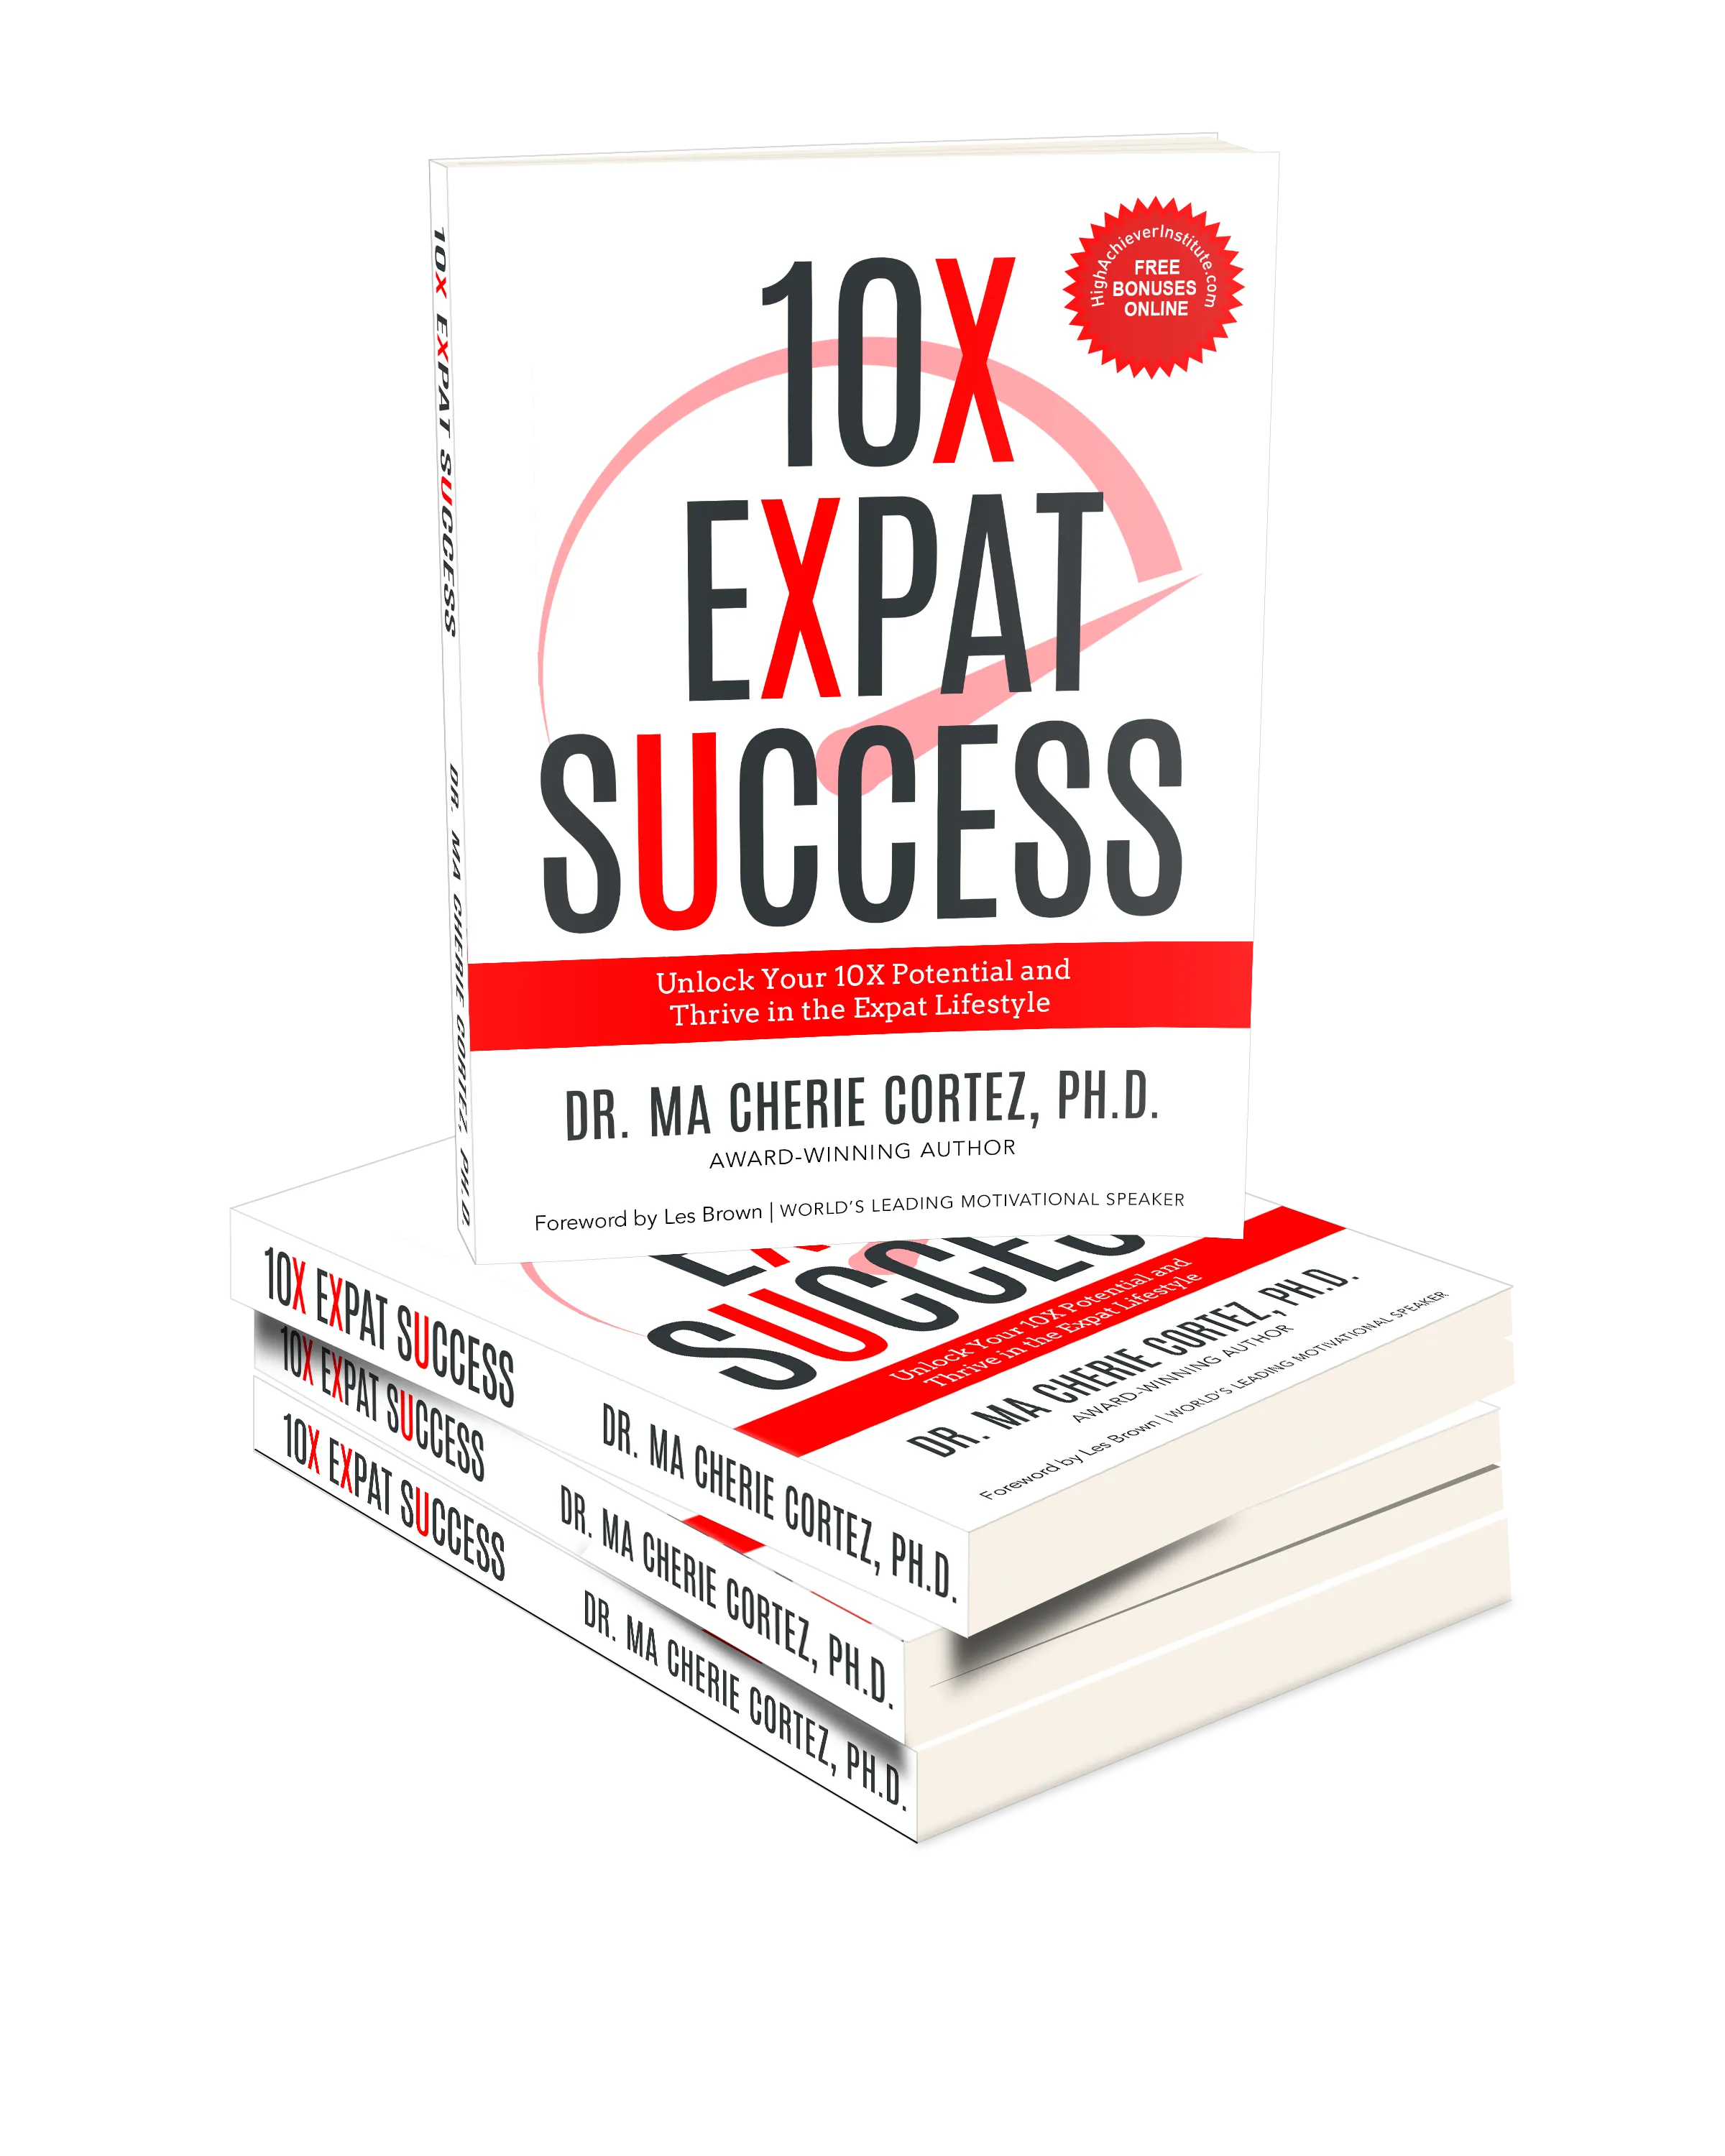 10X Expat Success Unlock Your 10X Potential and Thrive in the Expat Lifestyle by Dr. Ma Cherie Cortez. Dr. Cherie reveals her powerful techniques that propelled her from humble beginnings to spearheading a ground-breaking $100M global IT transformation program. Through relatable experiences and practical advice, you'll gain the tools and mindset to achieve remarkable success as an expat. Embark on this transformative journey and discover the keys to 10X expat success.